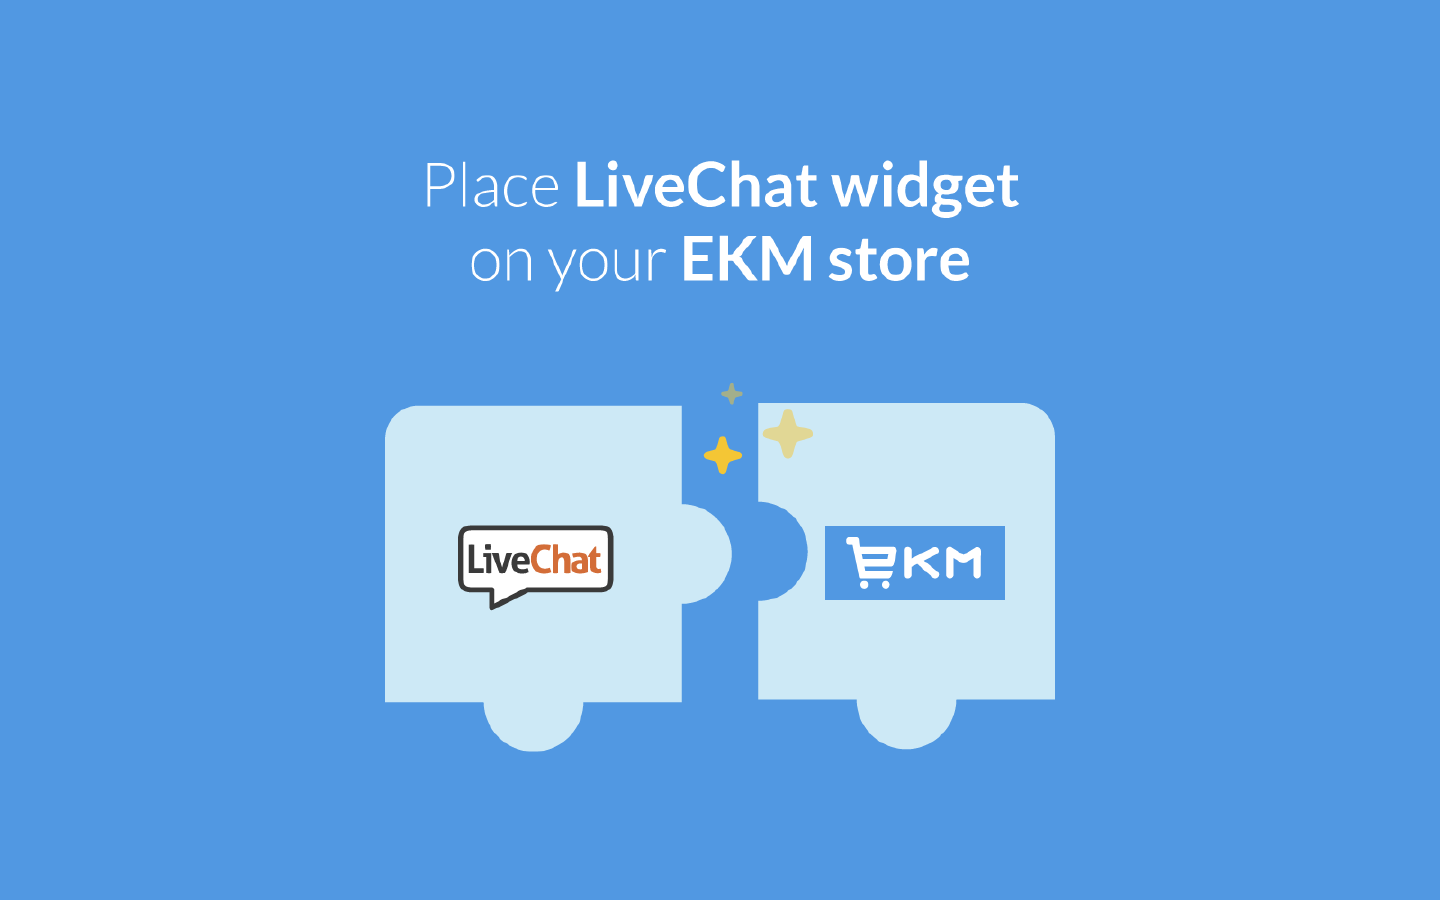 LiveChat integrates with EKM